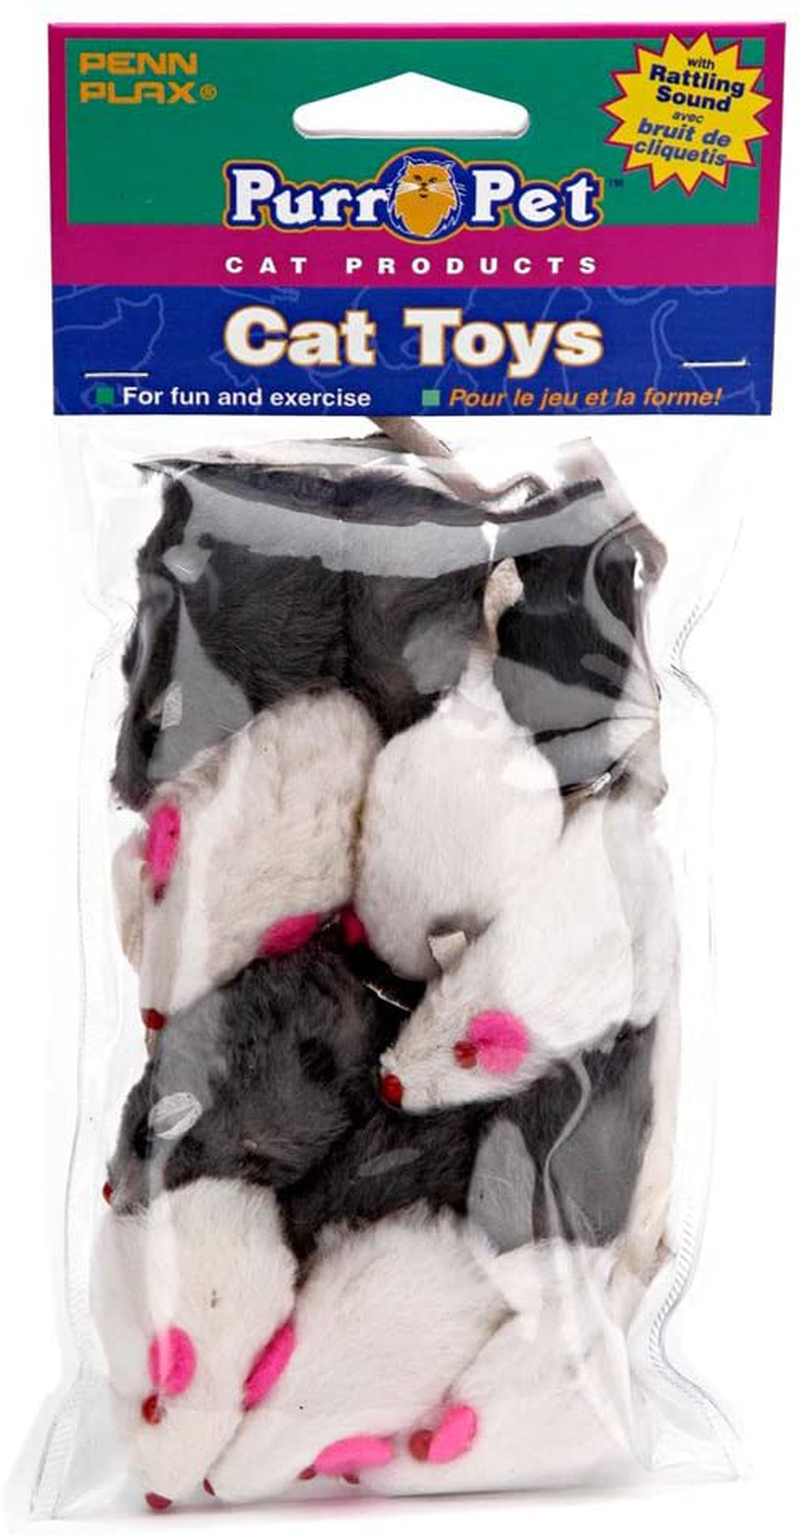 Penn Plax Play Fur Mice Cat Toys – Mixed Bag of 12 Play Mice with Rattling Sounds – 3 Color Variety Pack - CAT531, Black and White Animals & Pet Supplies > Pet Supplies > Cat Supplies > Cat Toys Penn-Plax   